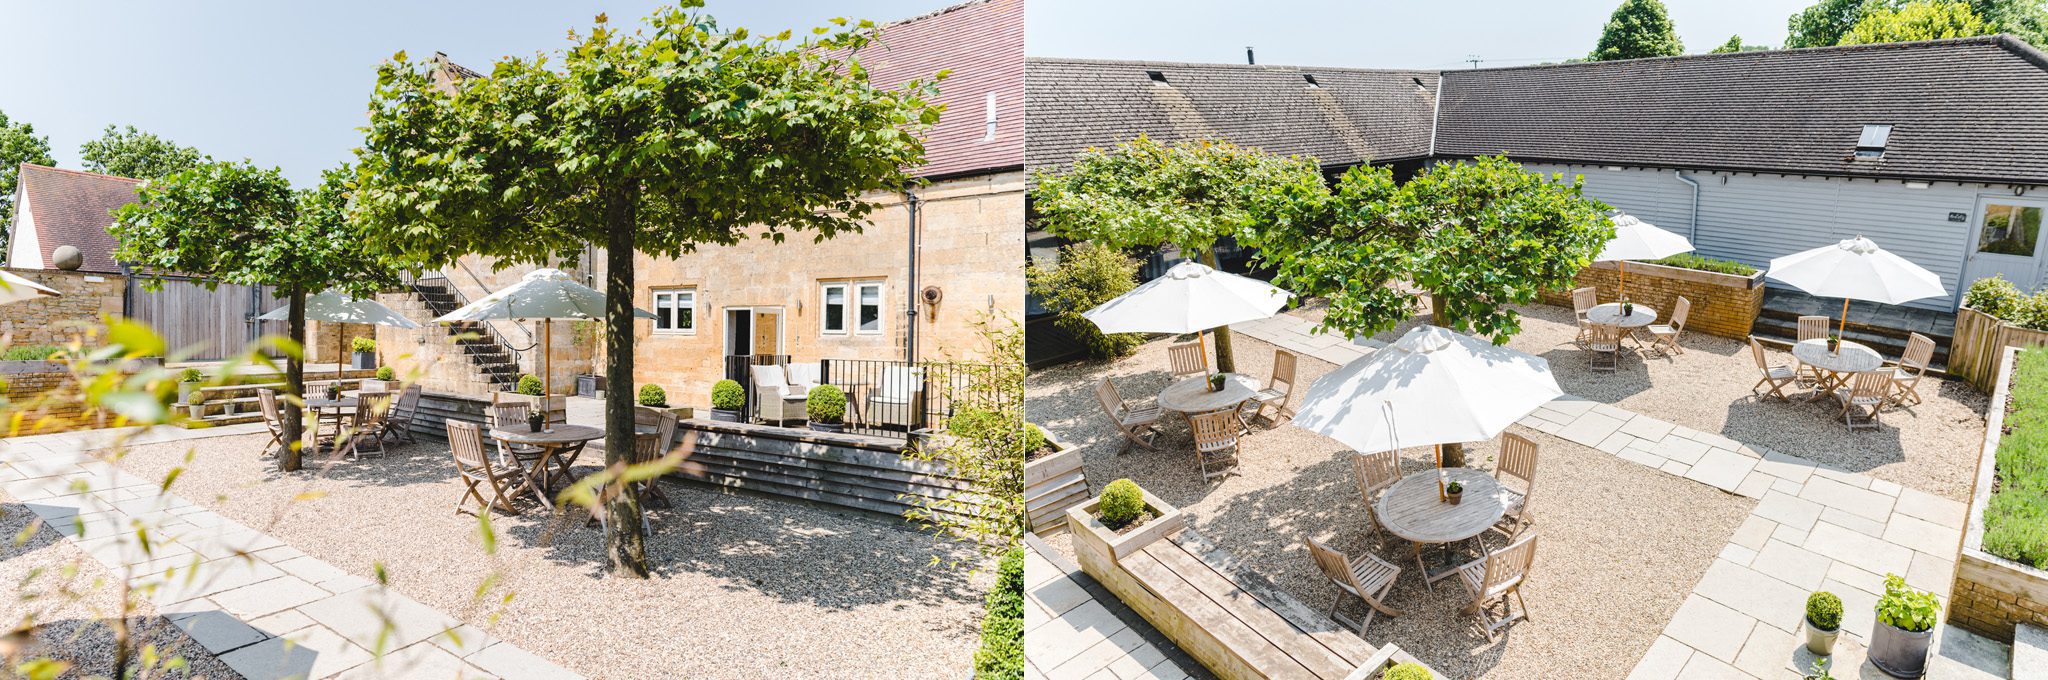 Lapstone Barn images of teh outdoor spaces including the courtyard